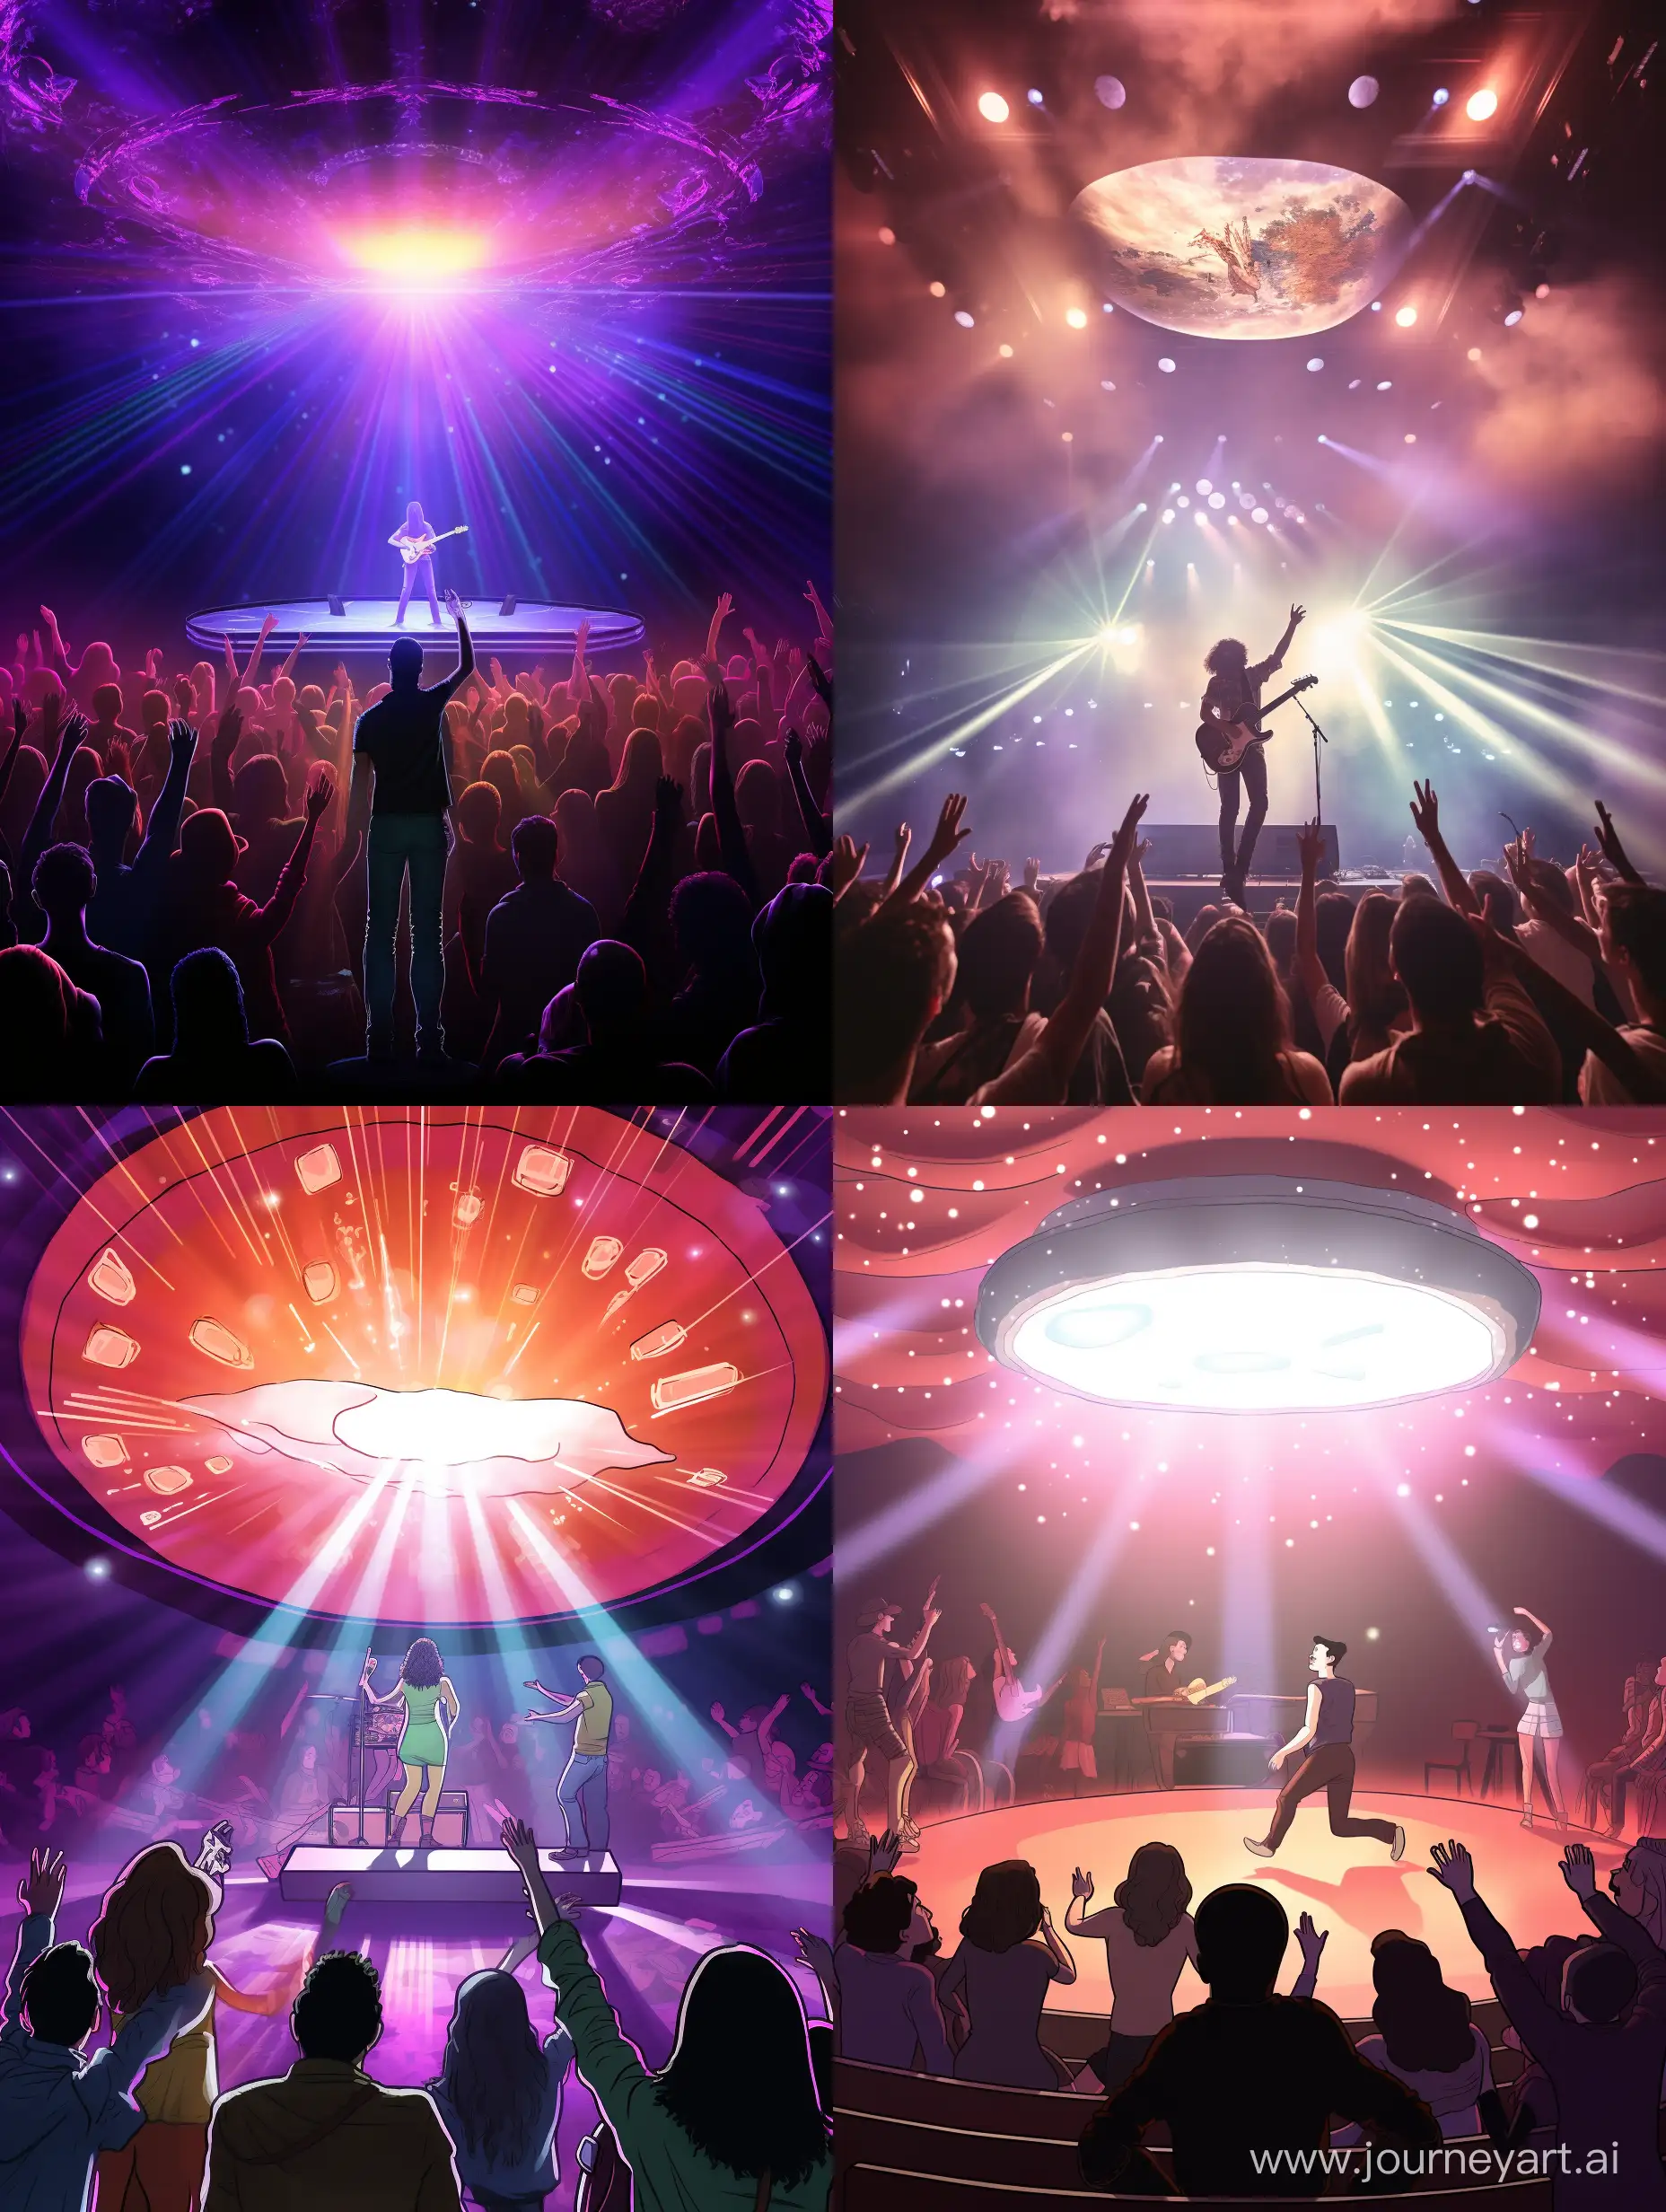 Extraterrestrial-Concert-5Member-Rock-Band-Welcomes-Singer-from-UFO-Beam